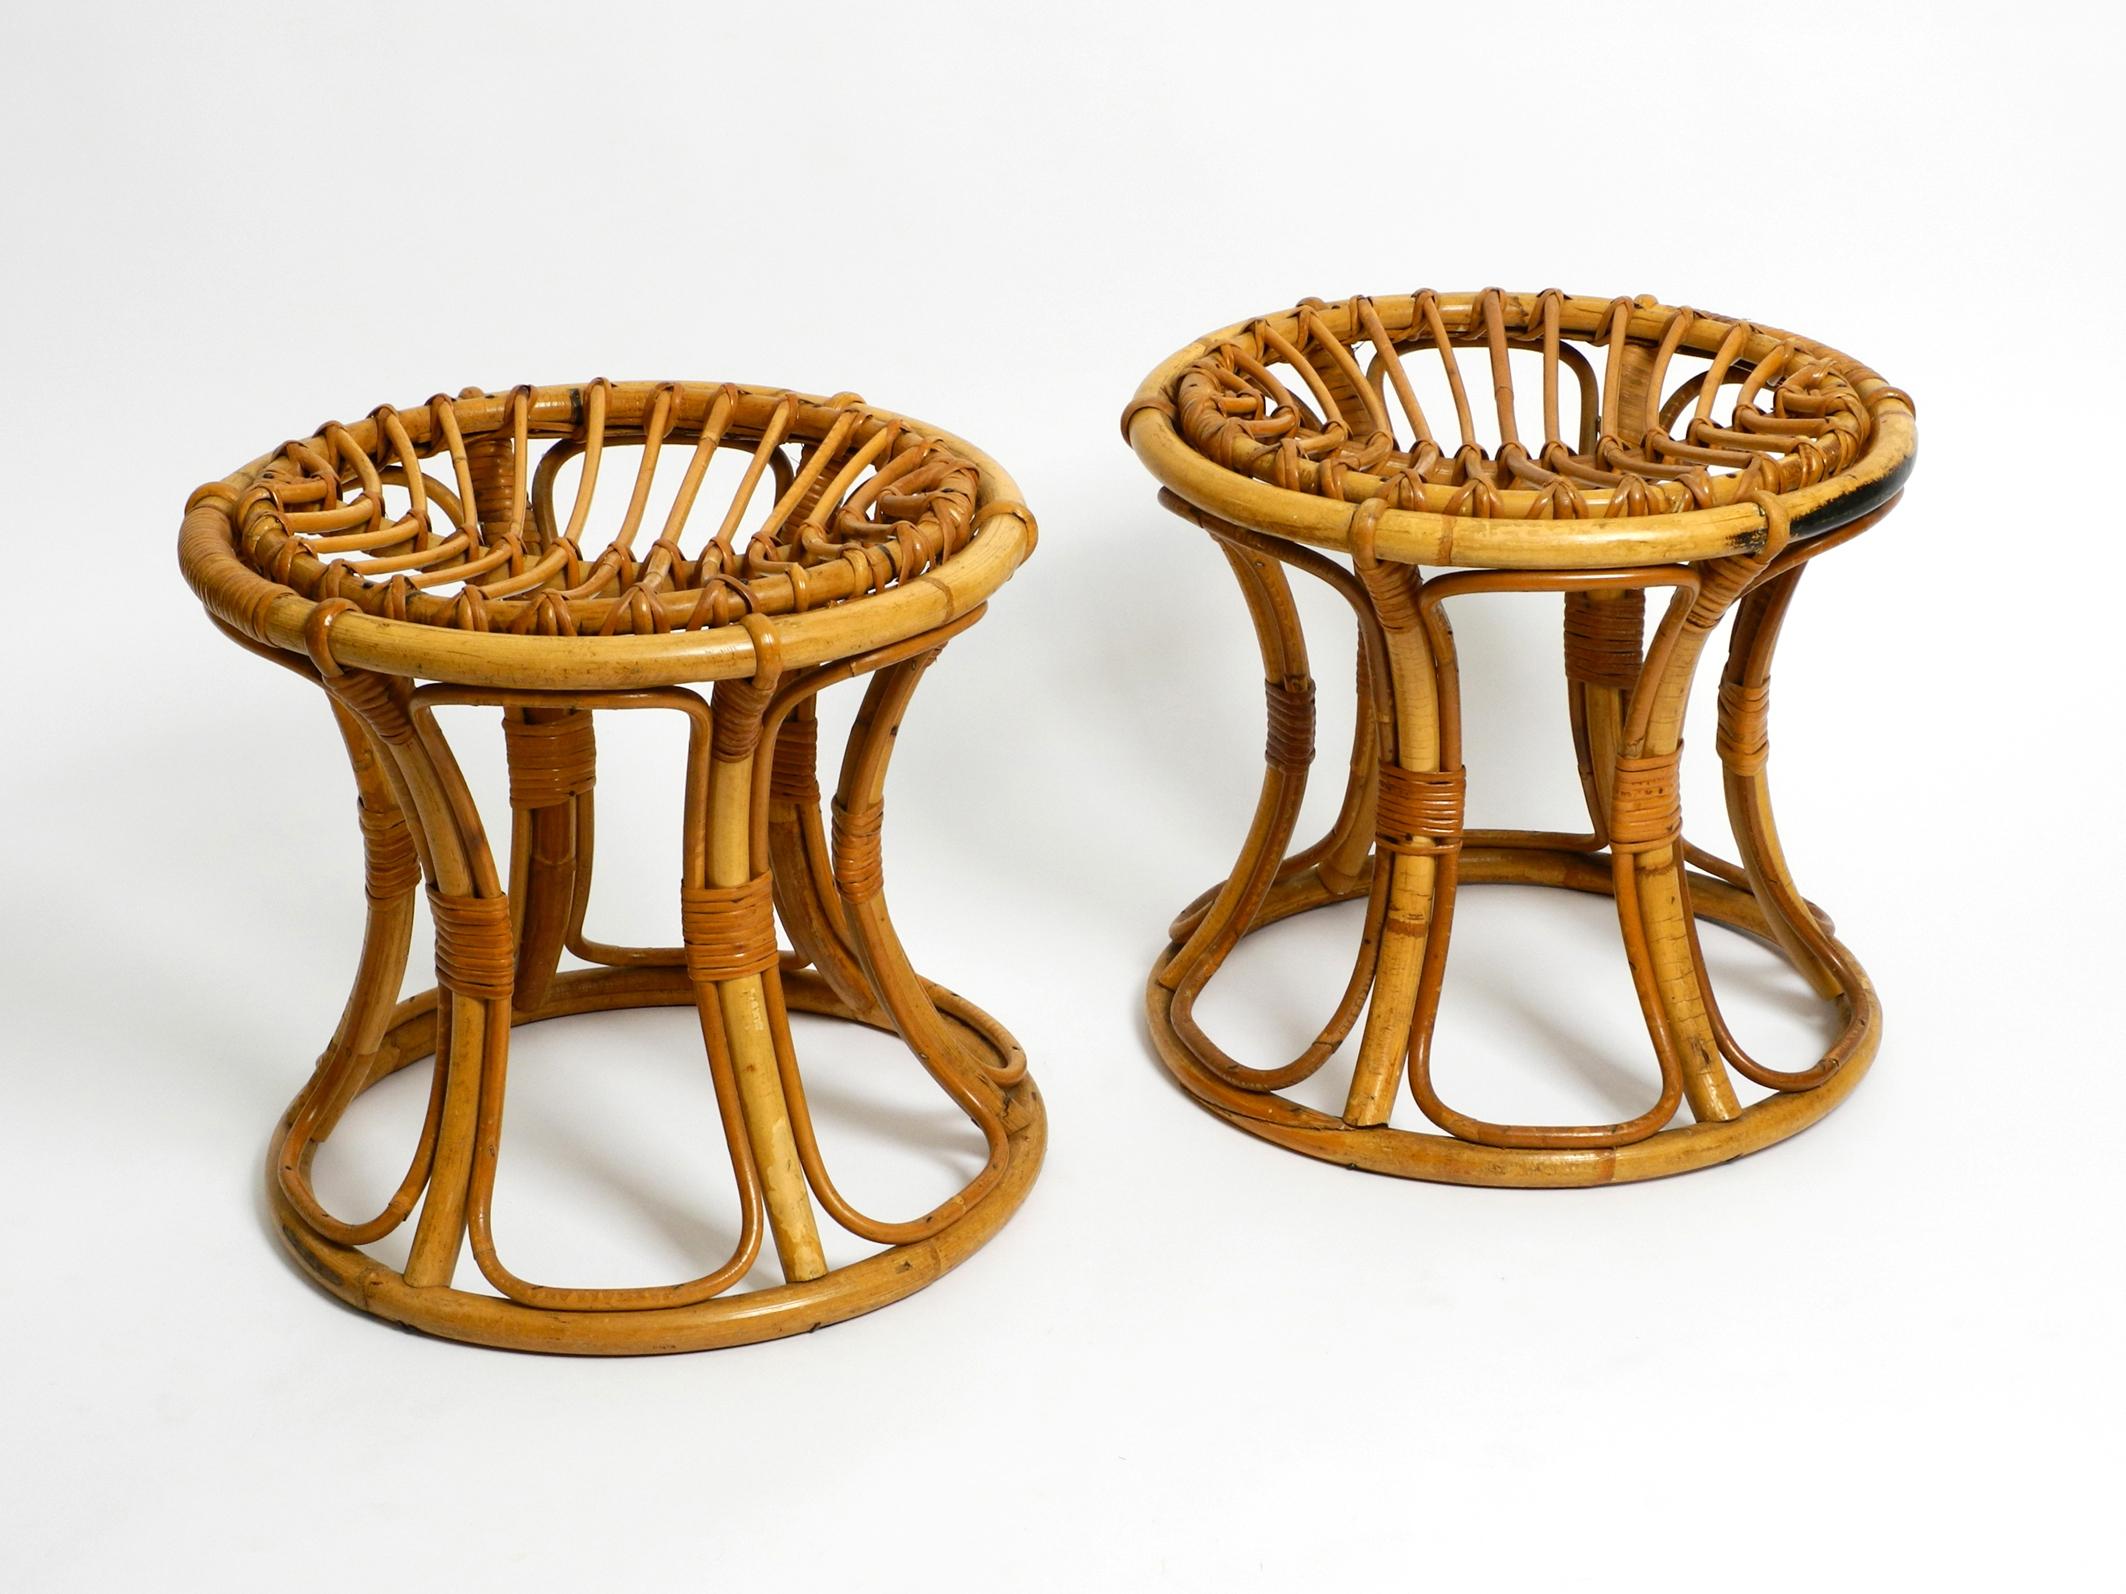 Pair of beautiful original 1960s bamboo stools. Made in Italy.
Beautiful design and very comfortable to sit on.
Manufactured entirely from bamboo in a very elaborate process.
Very good design classic with great seating comfort.
Both identical